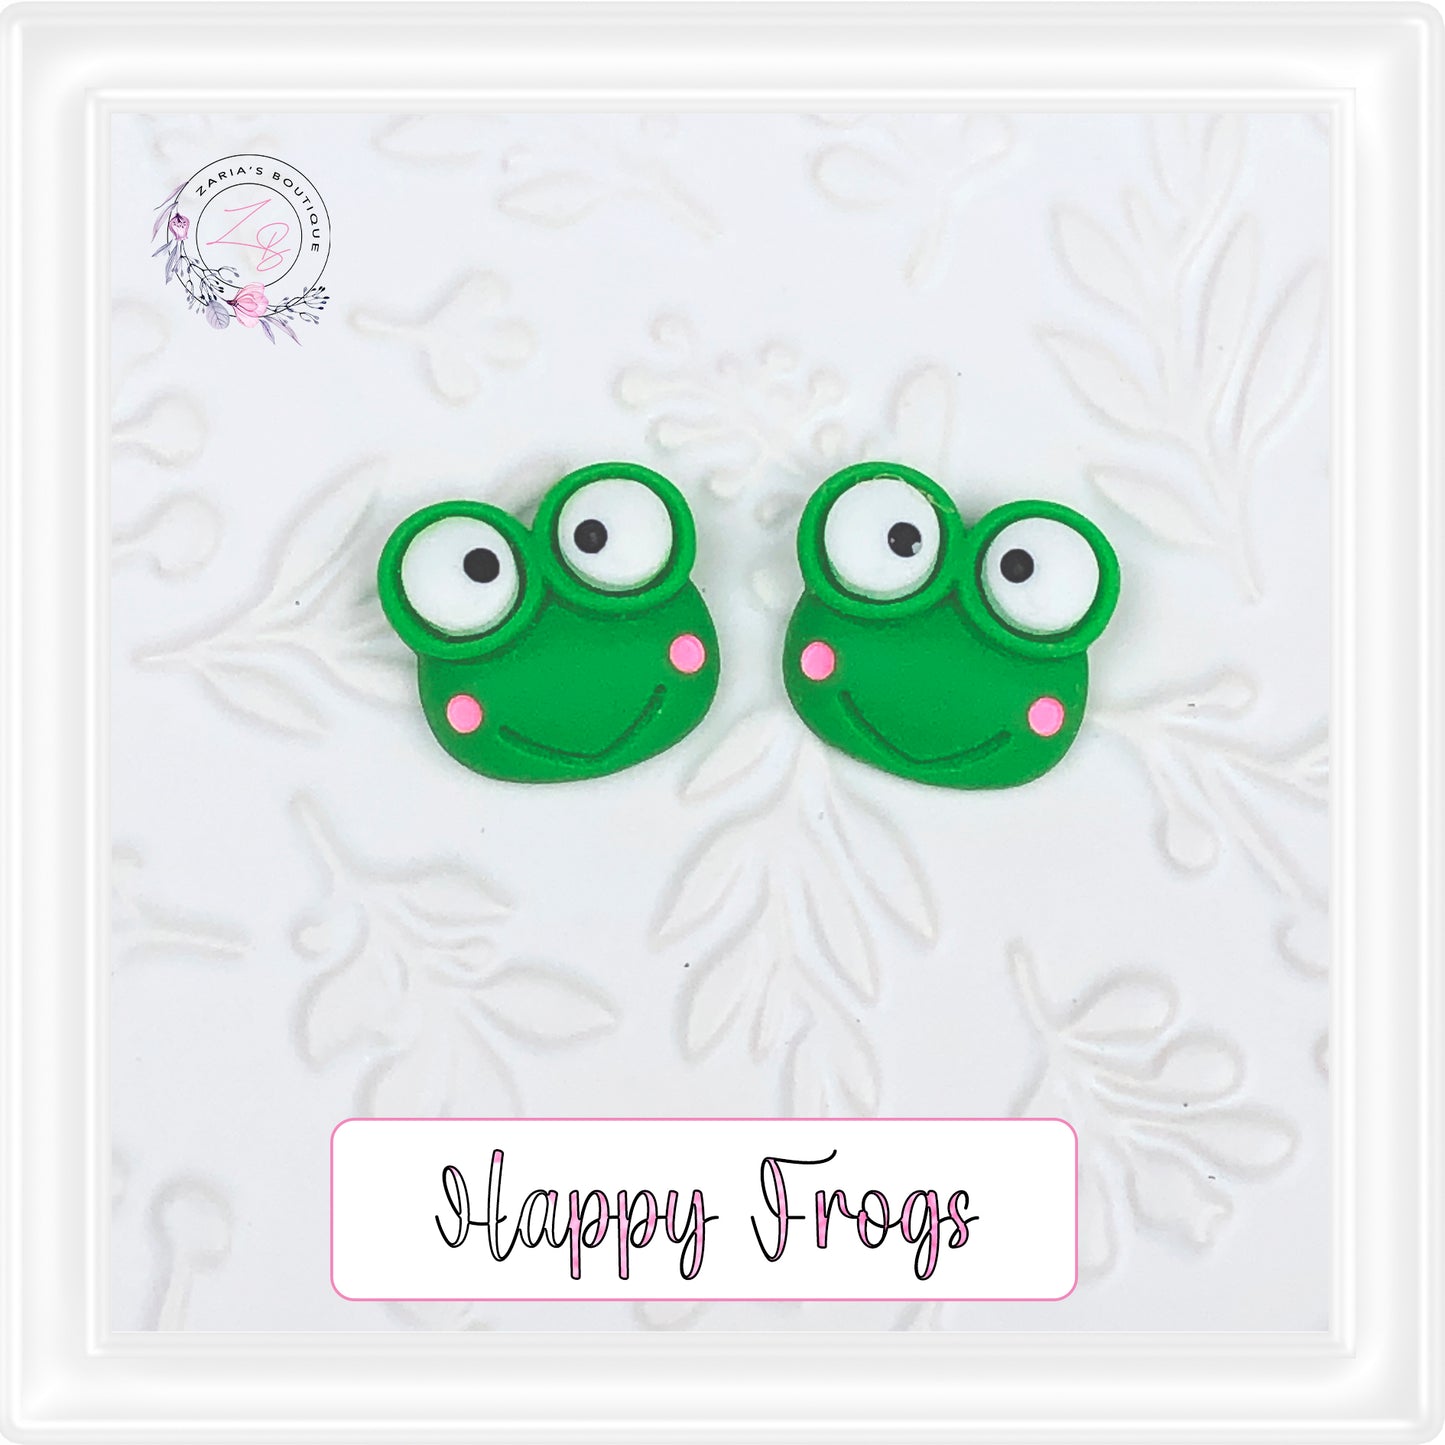 ⋅ HAPPY FROGS ⋅ Flatback Cabochon Resin Embellishments ⋅ 2 pieces ⋅